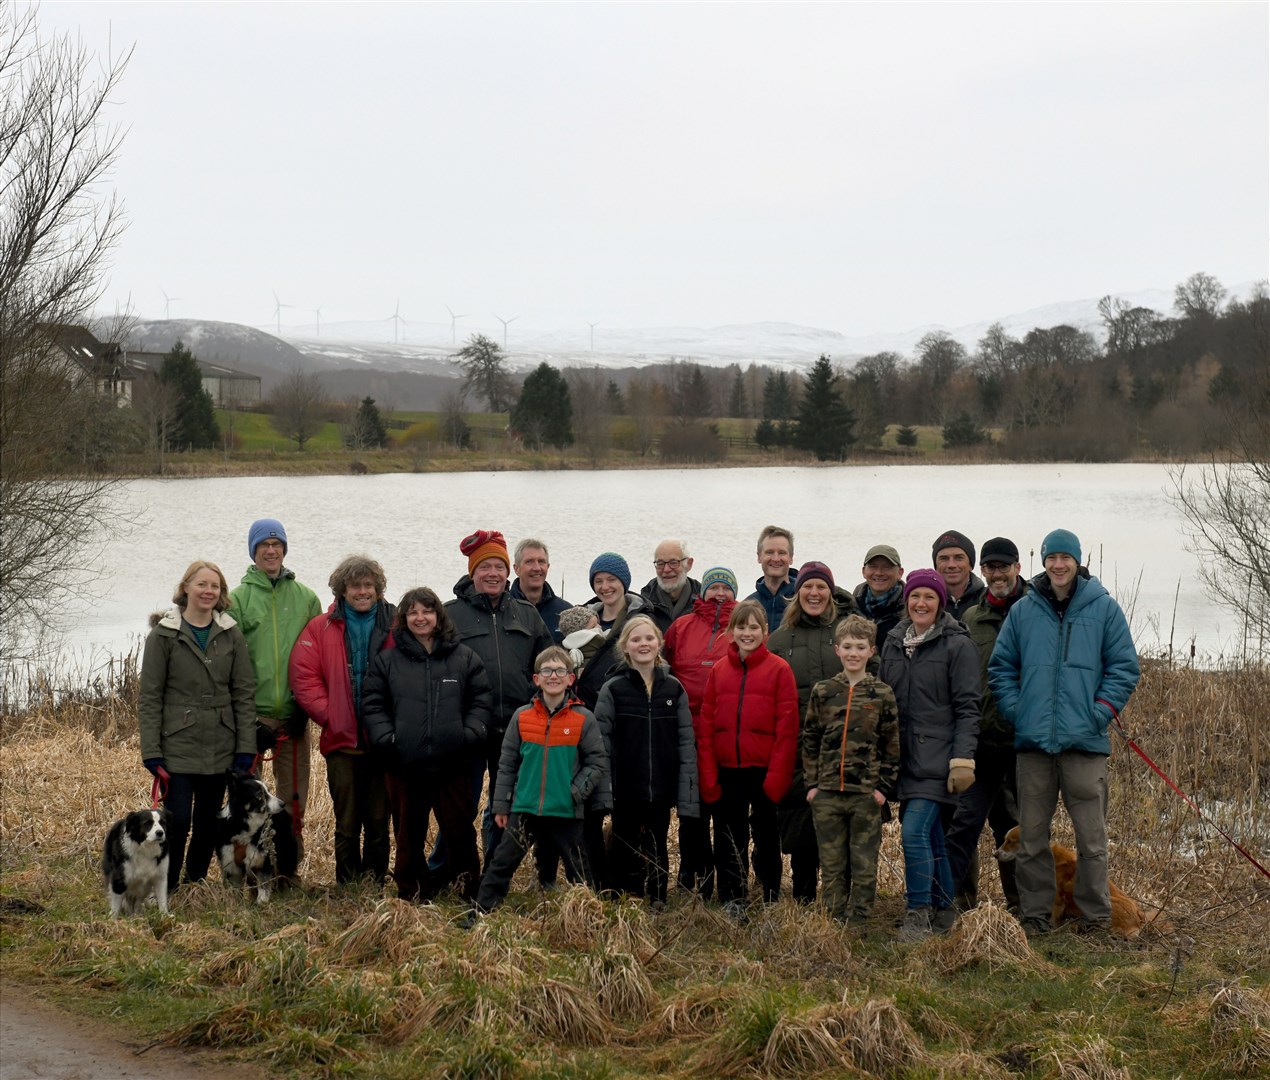 Strathpeffer and Contin Better Cable Route supporters in front of Loch Kinellan flagging an area they fear could be adversely affected by pylons. They want constructive dialogue with all options on the table. Picture: James Mackenzie.